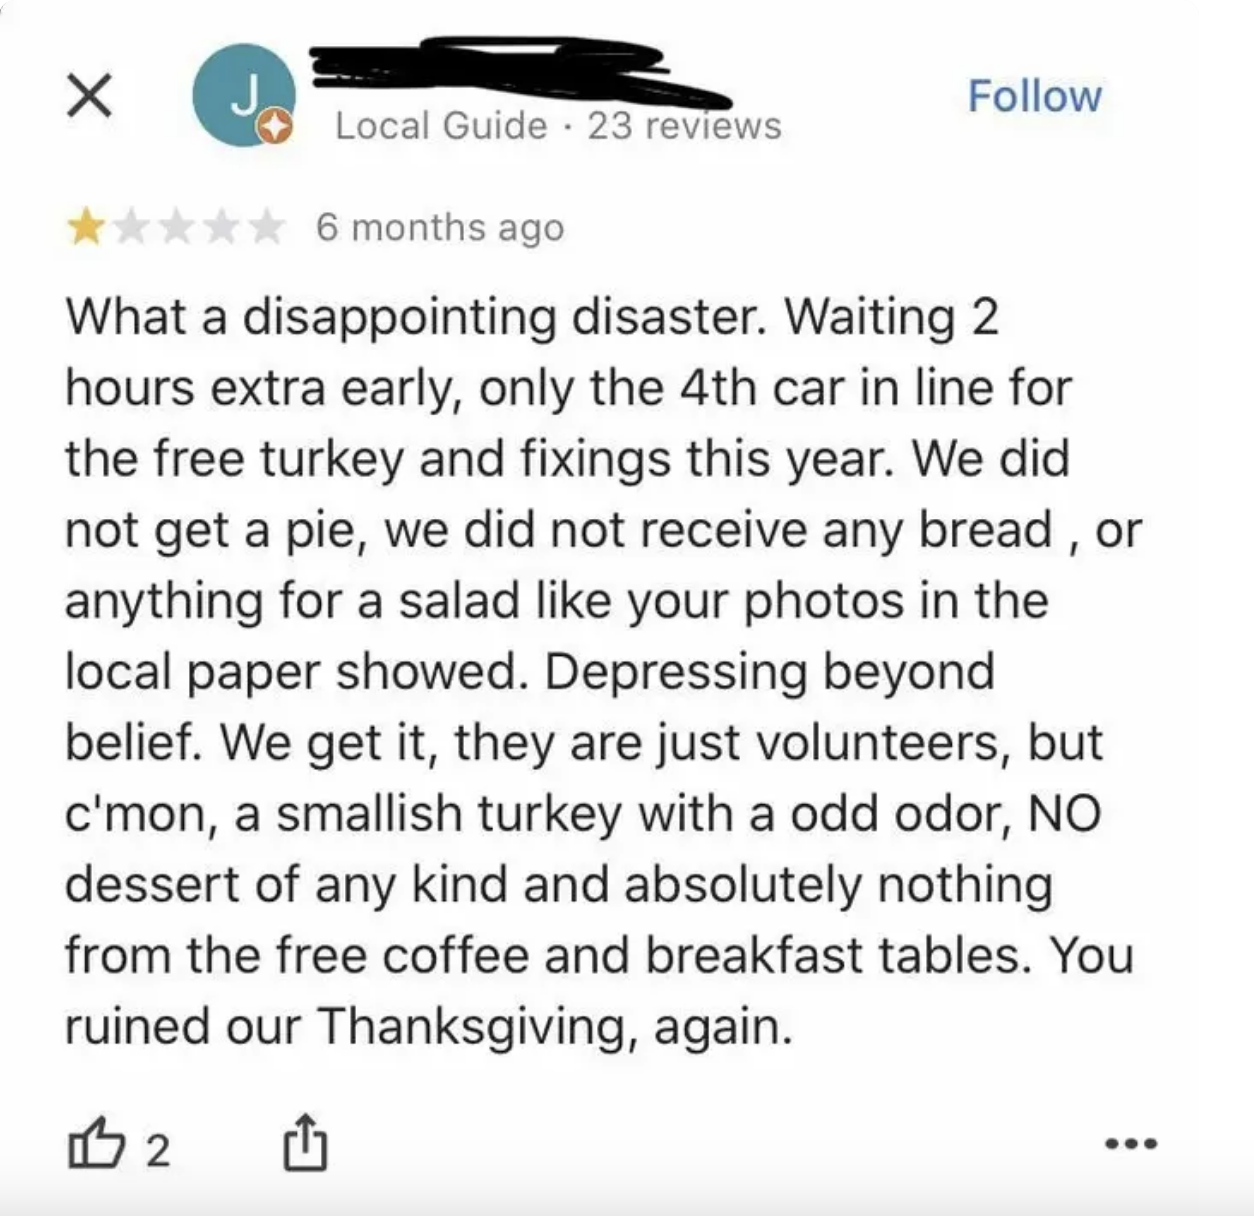 A review says they waited in line for free Thanksgiving turkey, but didn&#x27;t get a pie, bread, or salad, so they say &quot;you ruined our Thanksgiving&quot;